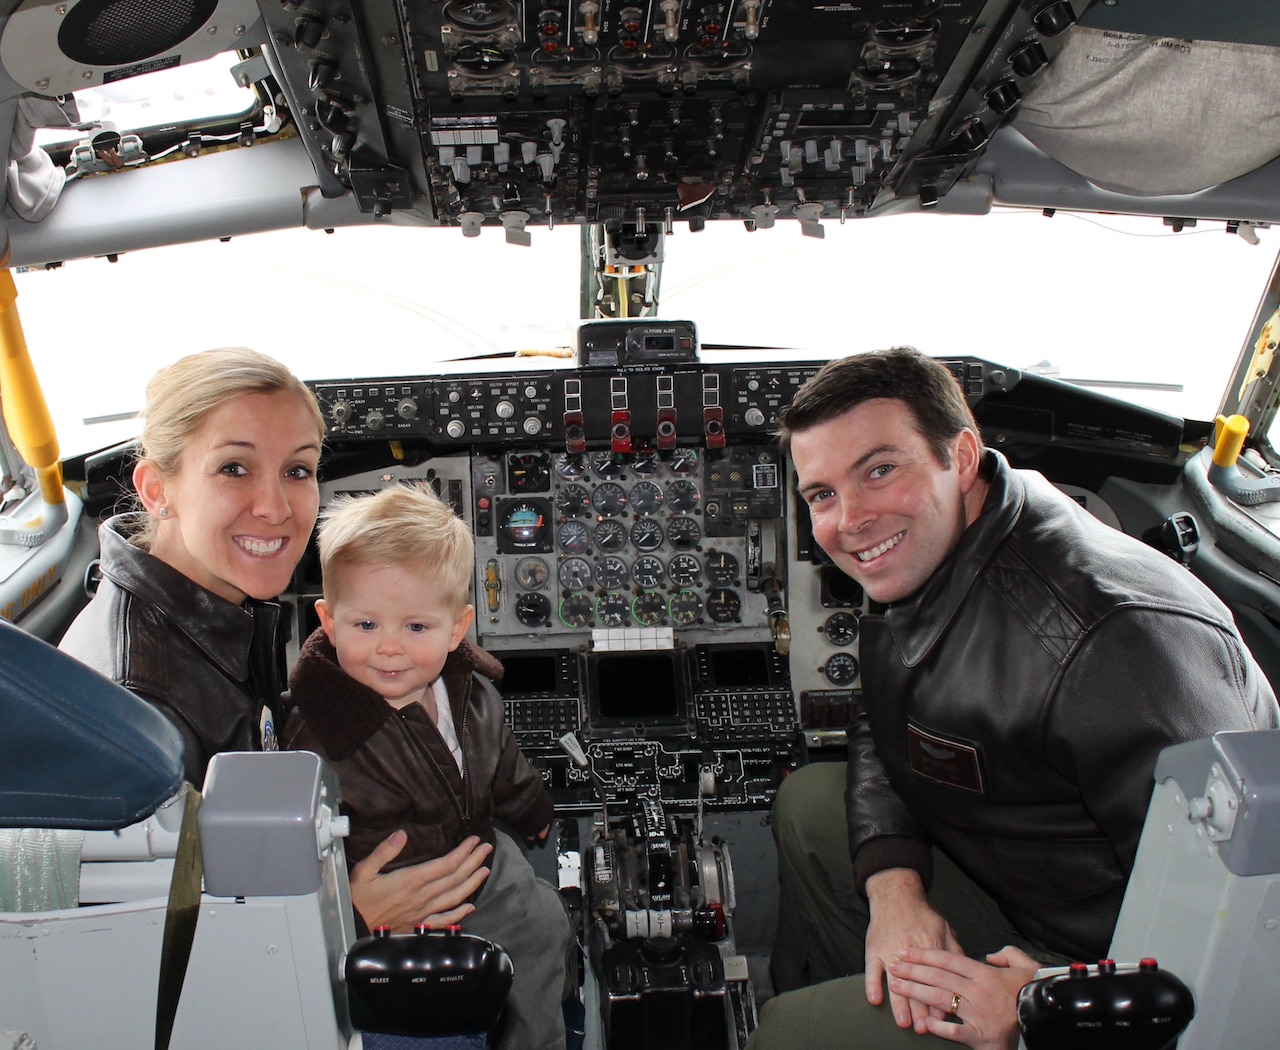 Capt. Chrystina Jones, left, 350th Air Refueling Squadron pilot, and Maj. Matt Jones, 349th ARS pilot, pose with their son, Dec. 2015, at McConnell Air Force Base, Kan. They once flew the C-130 Hercules but currently “refuel the fight” as KC-135 Stratotanker pilots, an aircraft that first took flight 60 years ago. (Courtesy photo)